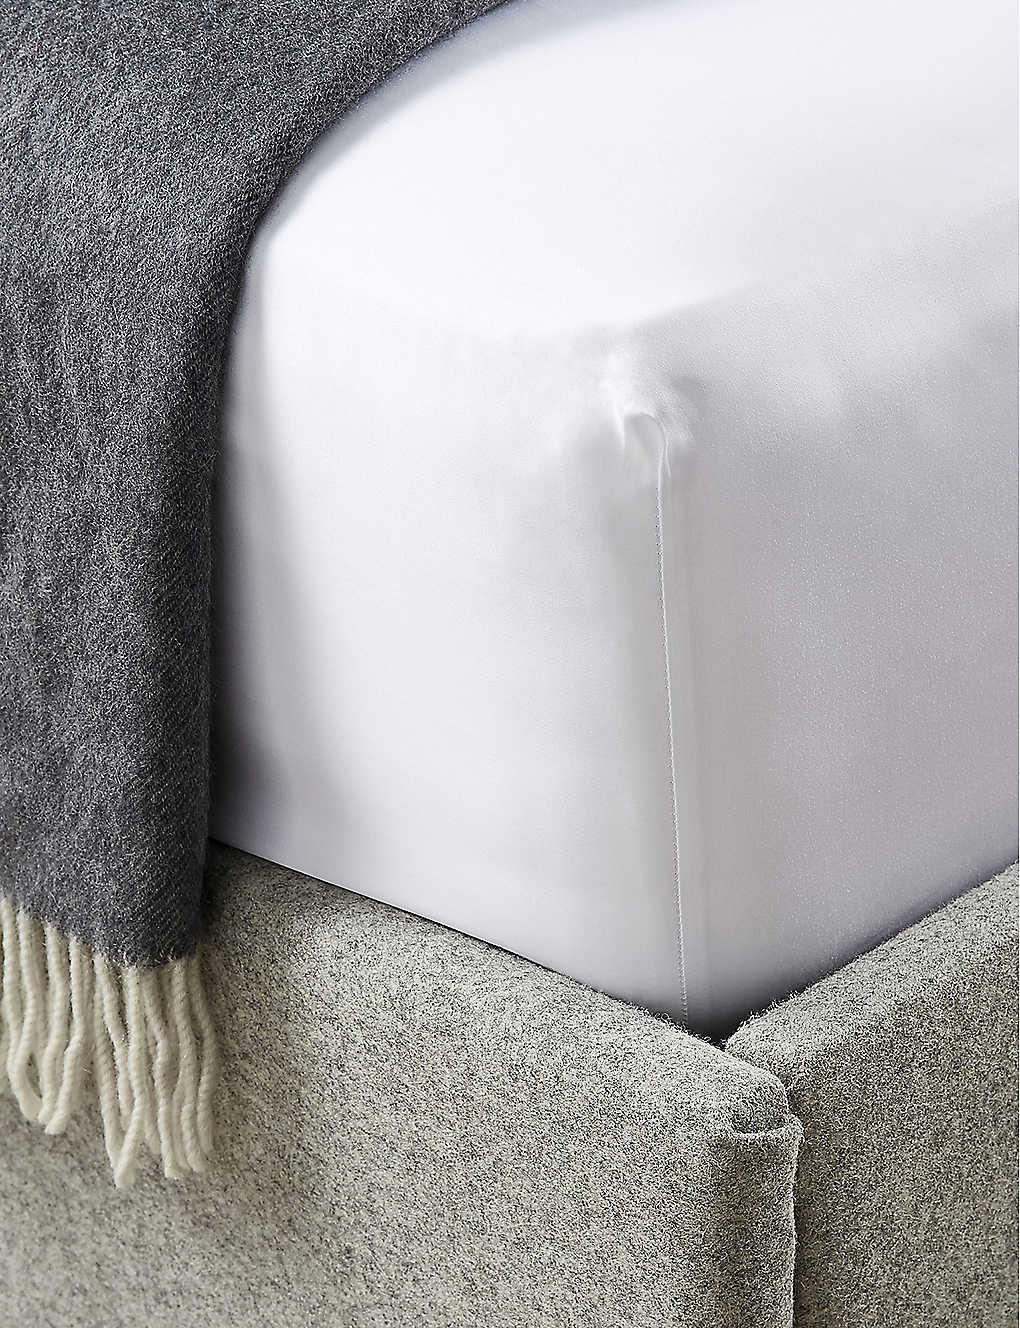 Shop The White Company White Savoy Cotton Fitted Sheet